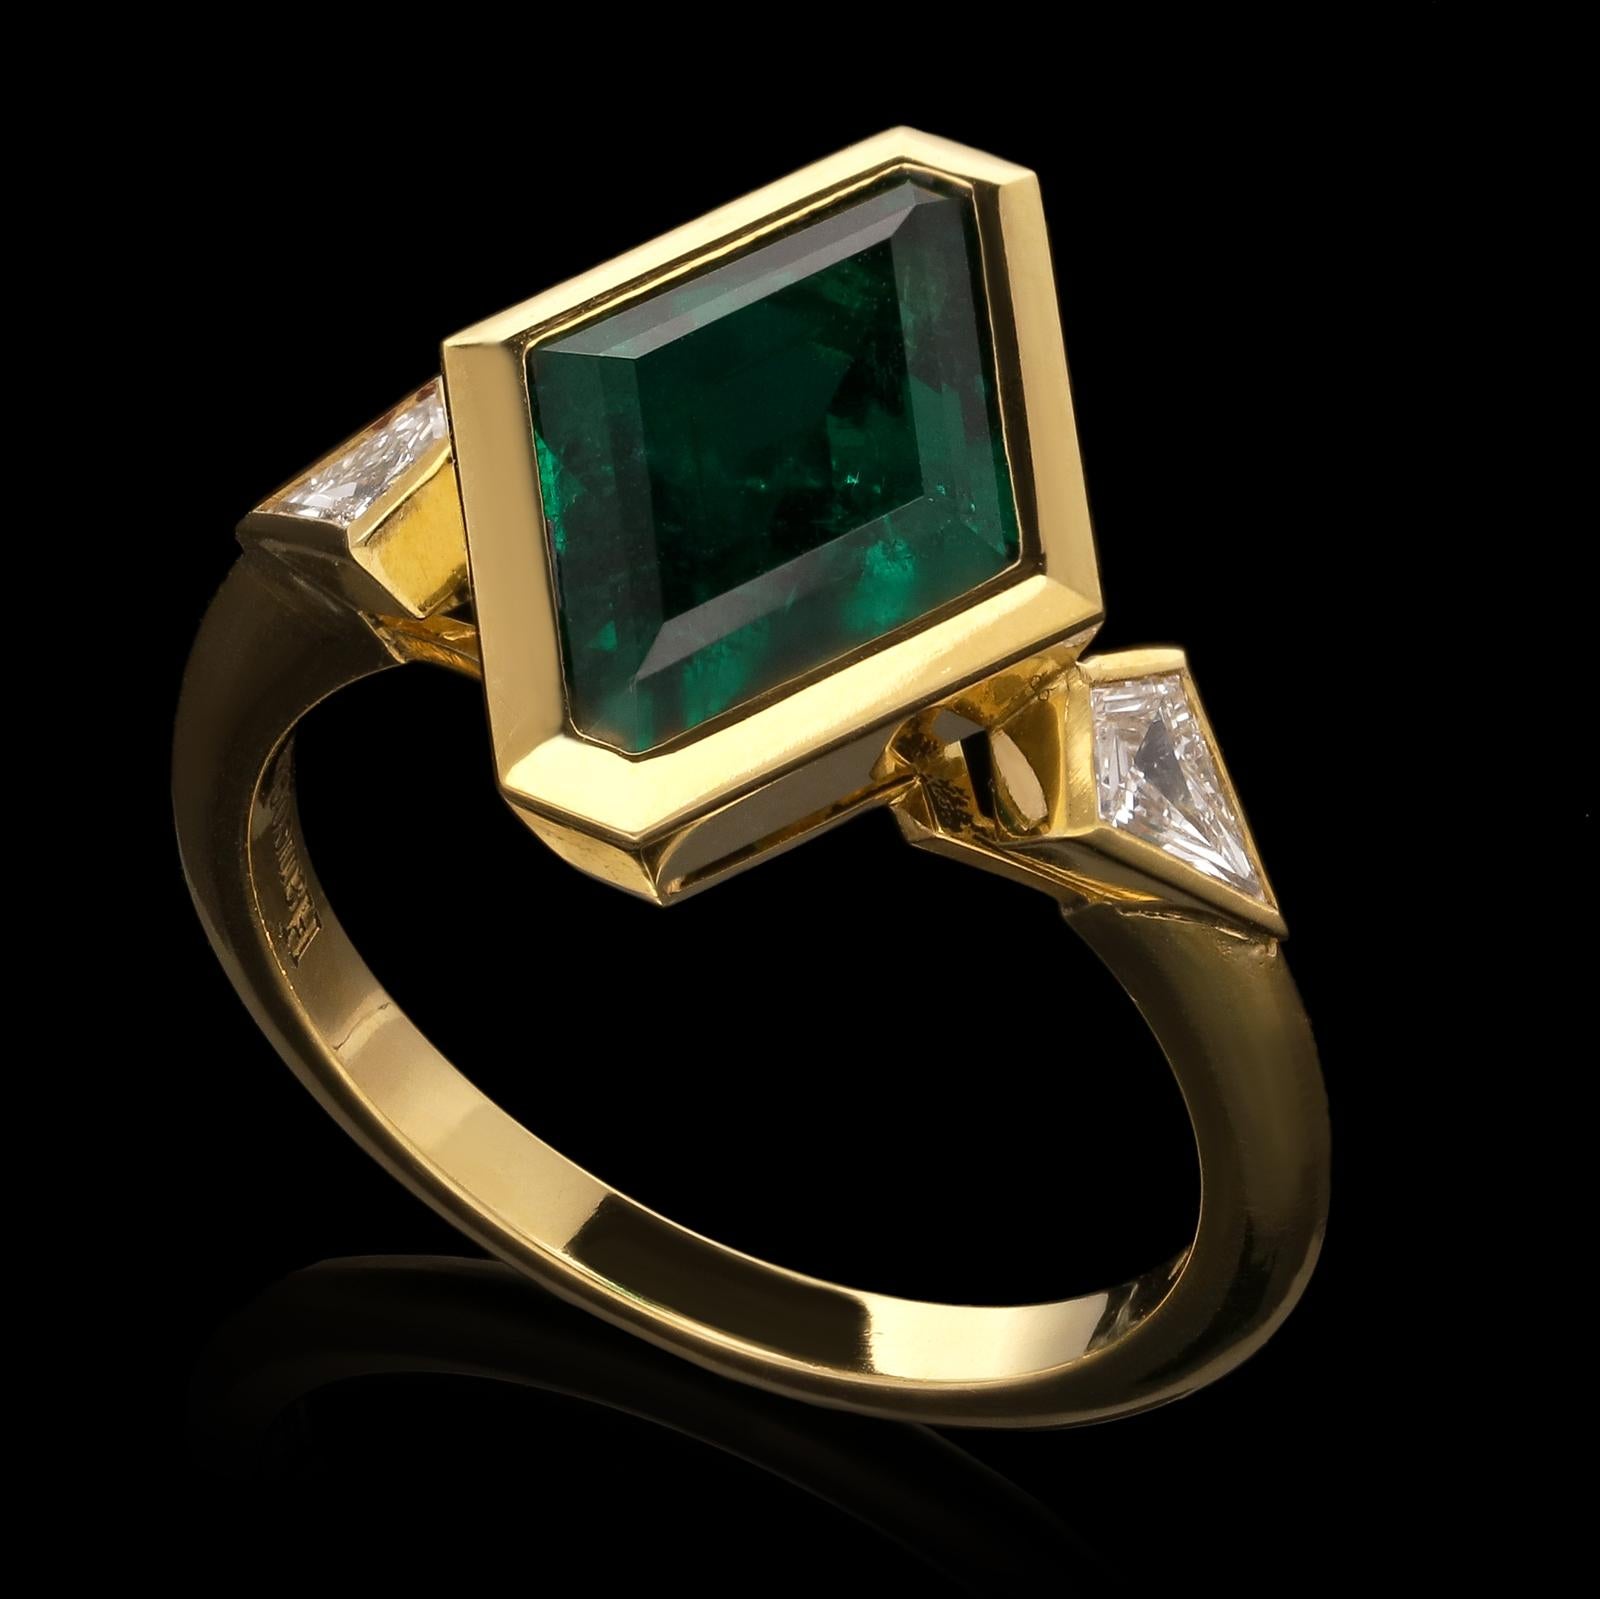 A beautiful lozenge-shape emerald and diamond ring by Hancocks, centred with a step-cut lozenge-shape richly saturated deep green Zambian emerald weighing 2.74ct set within a geometric rub-over bezel setting between shoulders set with kite-shape